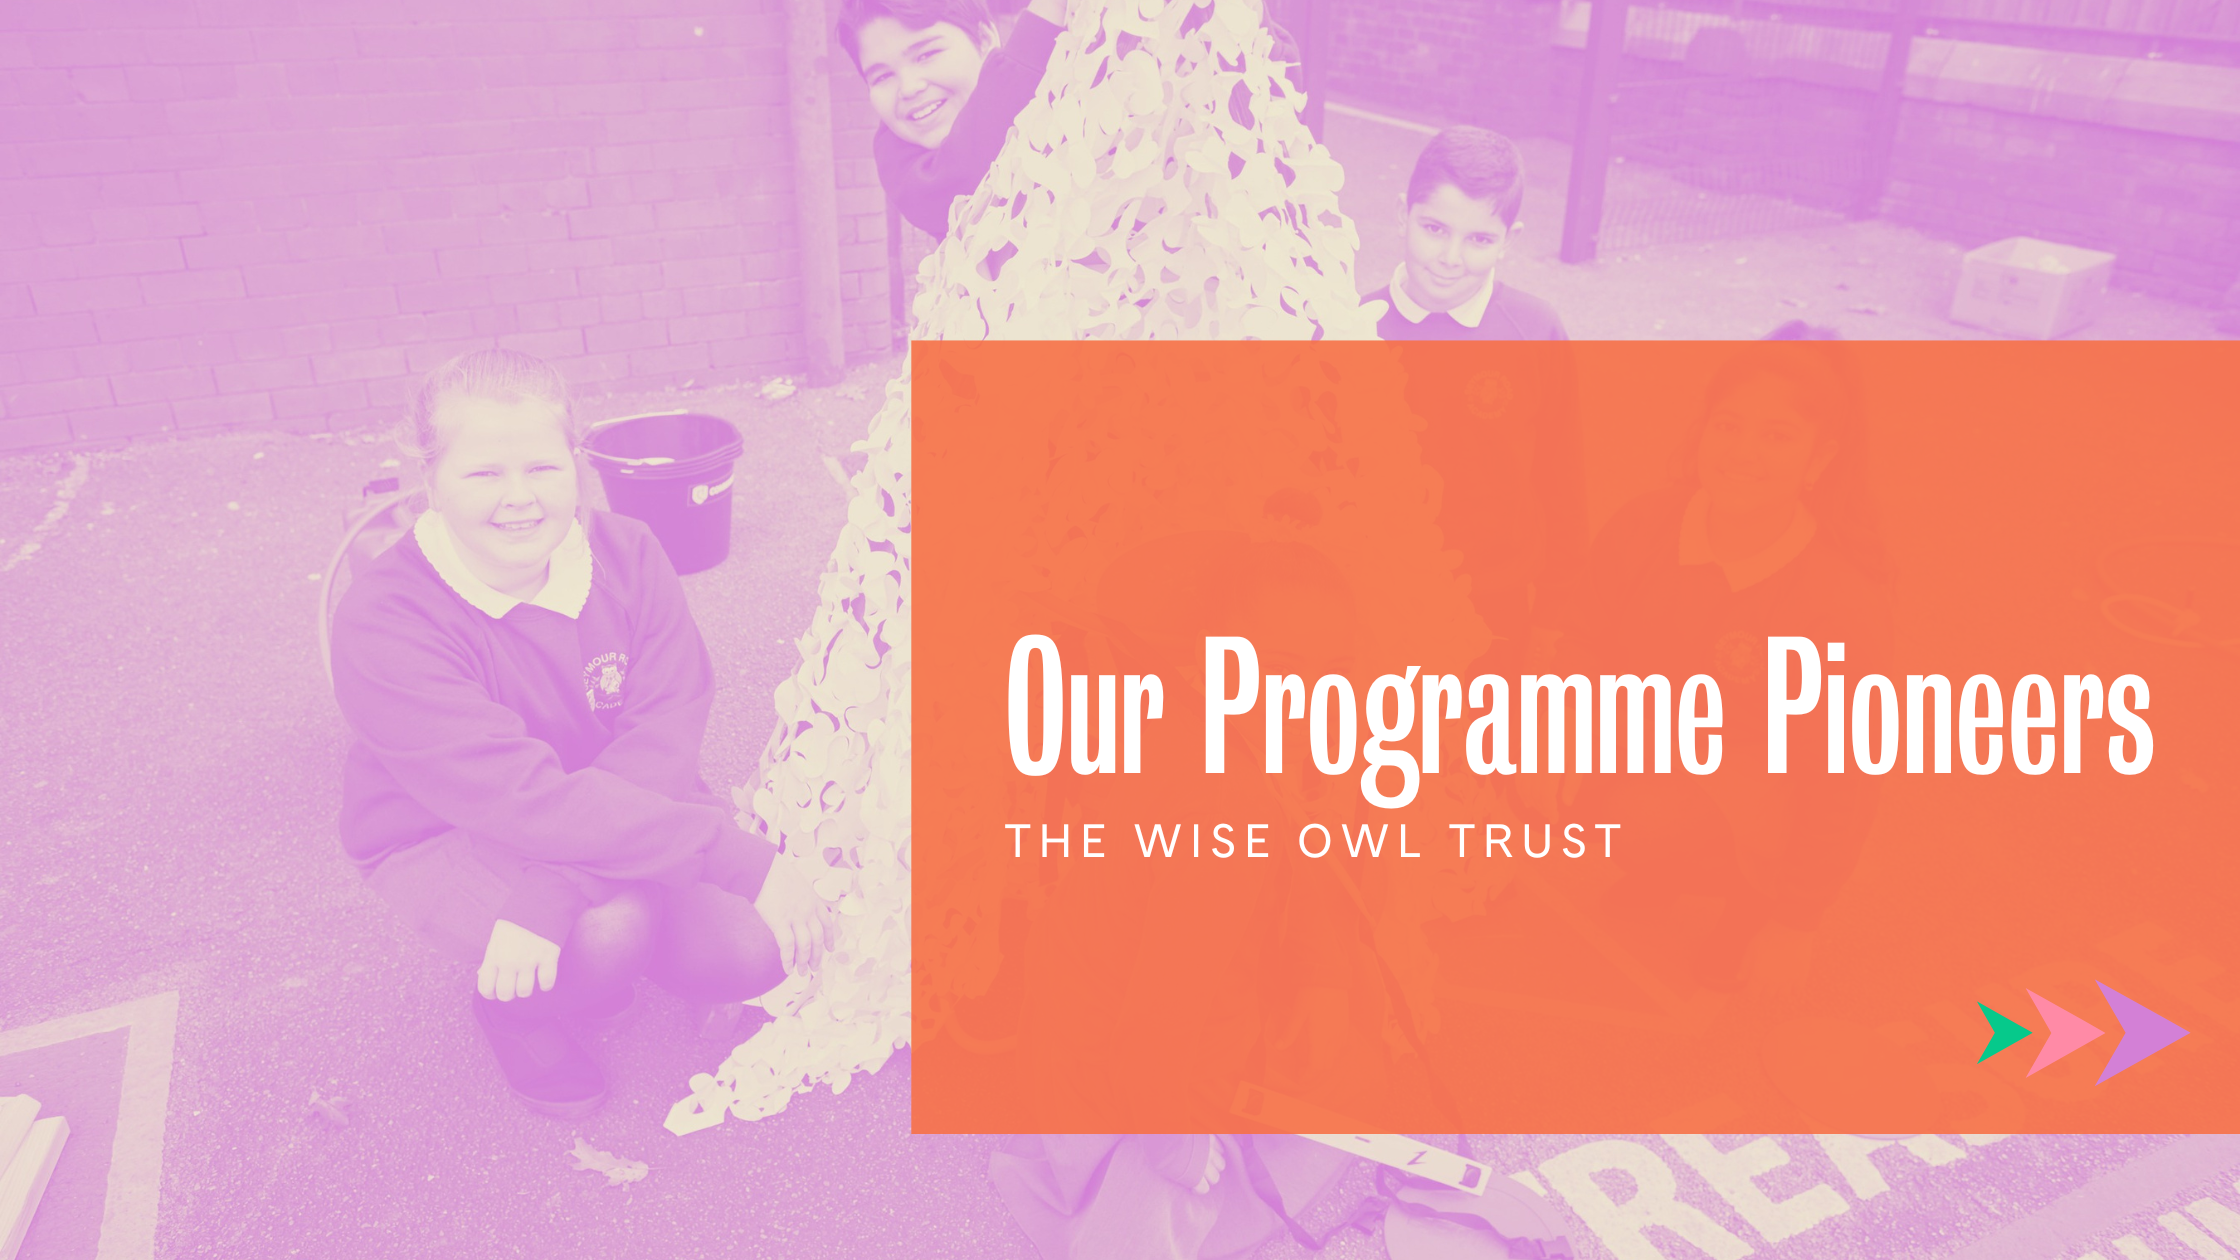 Our Programme Pioneers The Wise Owl Trust